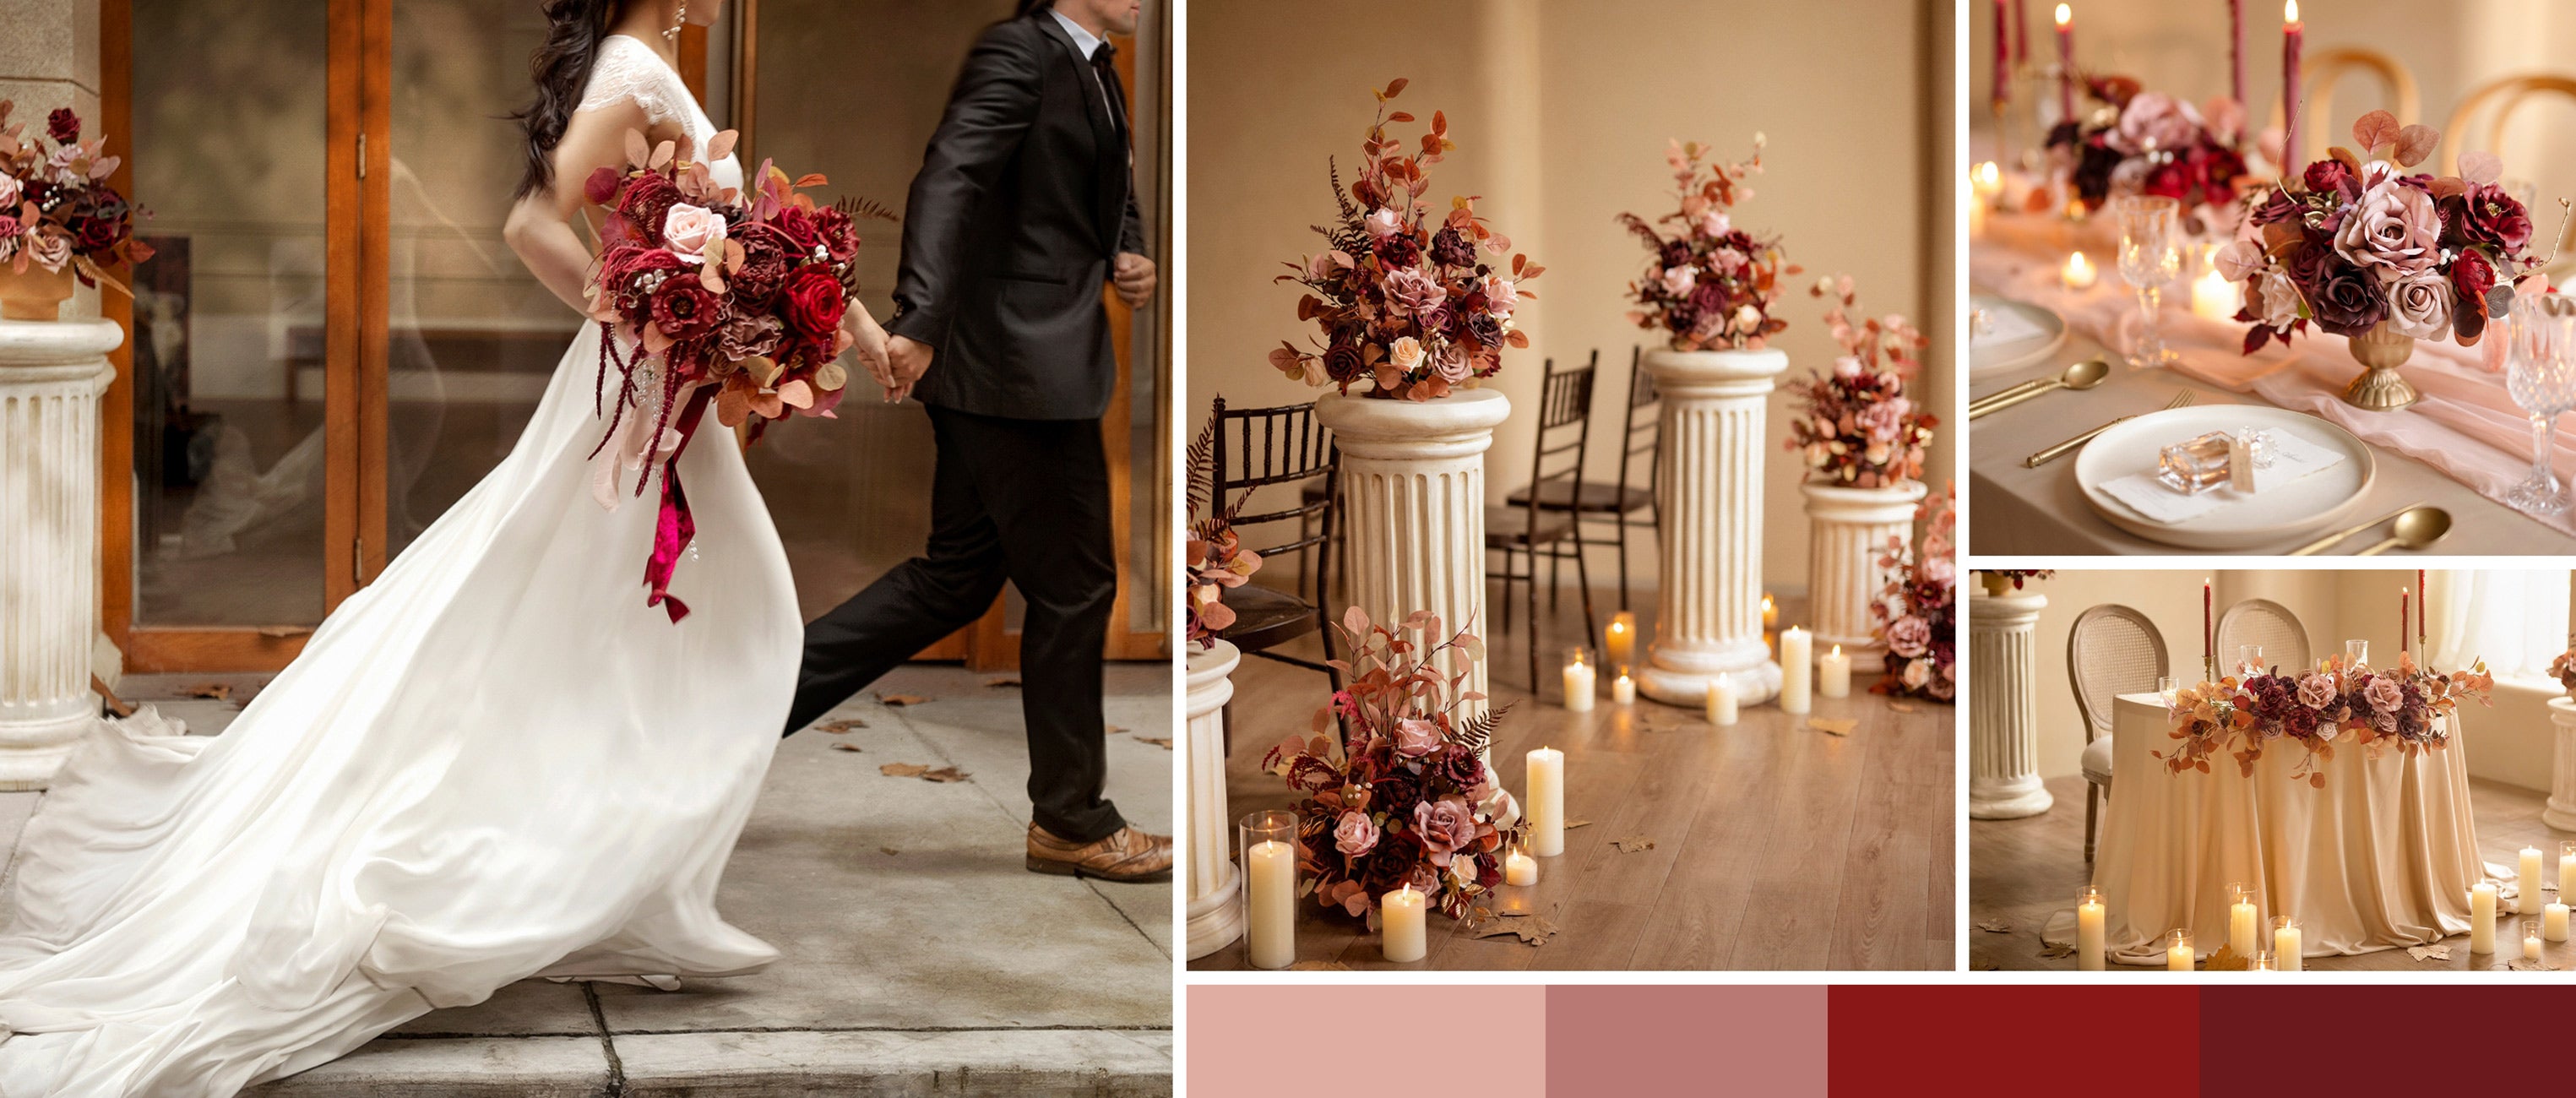 Burgundy and Dusty Rose Wedding pc banner